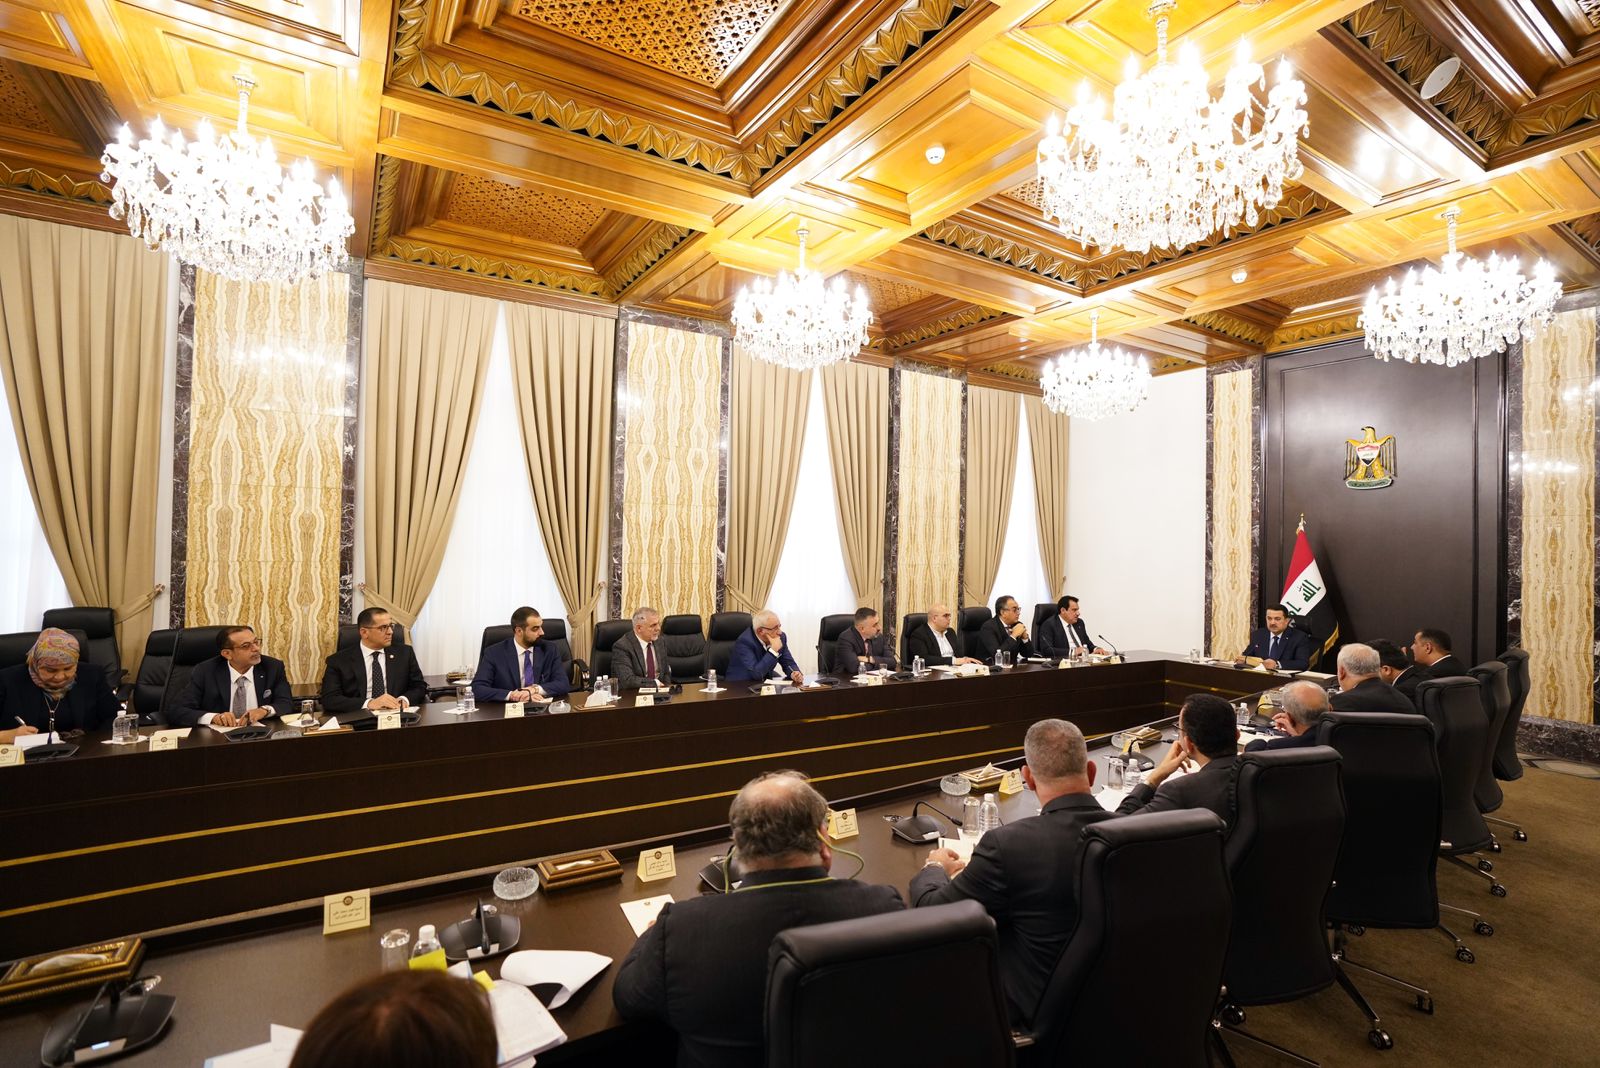 Al-Sudani meets with the federation of Iraq's commerce chamers to address currency fluctuation